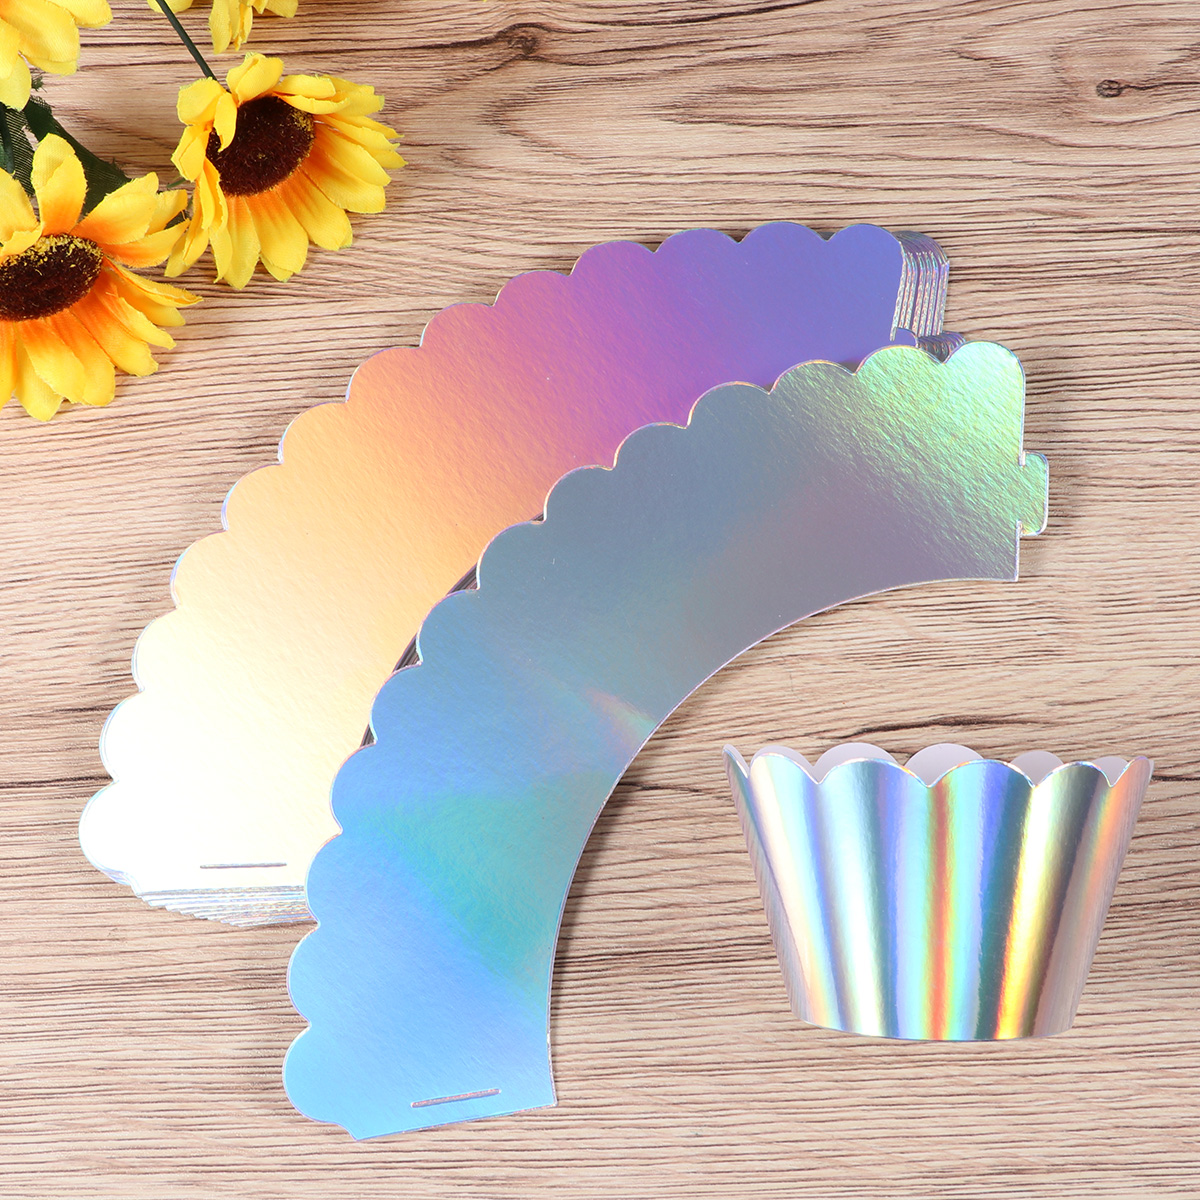 24pcs Iridescent Rainbow Cupcake Wrappers Cake Paper Cups Cupcake Wrapper Cupcake Liners Baking For Baby Shower Birthday Party